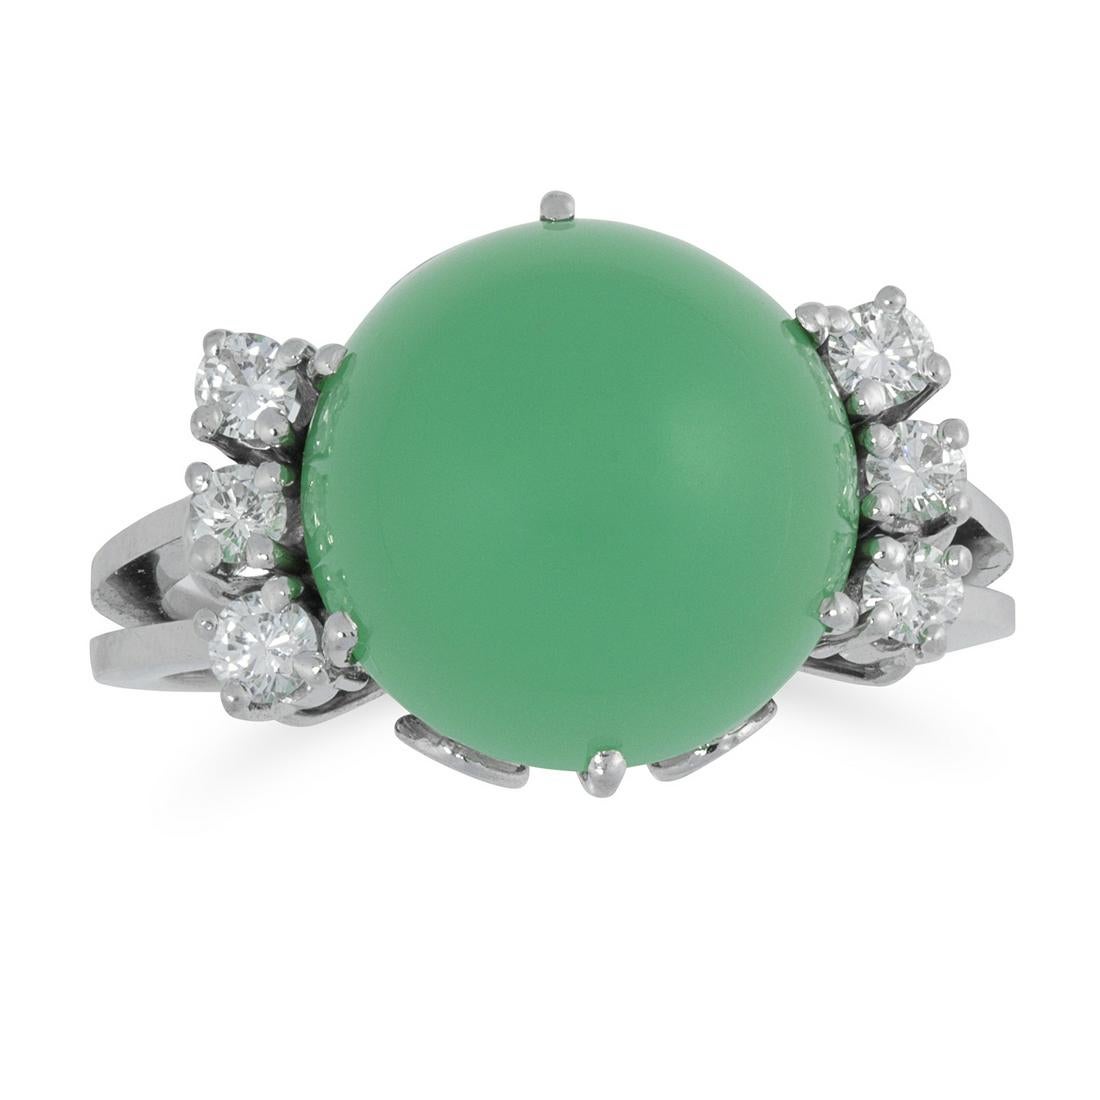 A CHRYSOPRASE AND DIAMOND RING set with a round cabochon chrysoprase between trios of round cut